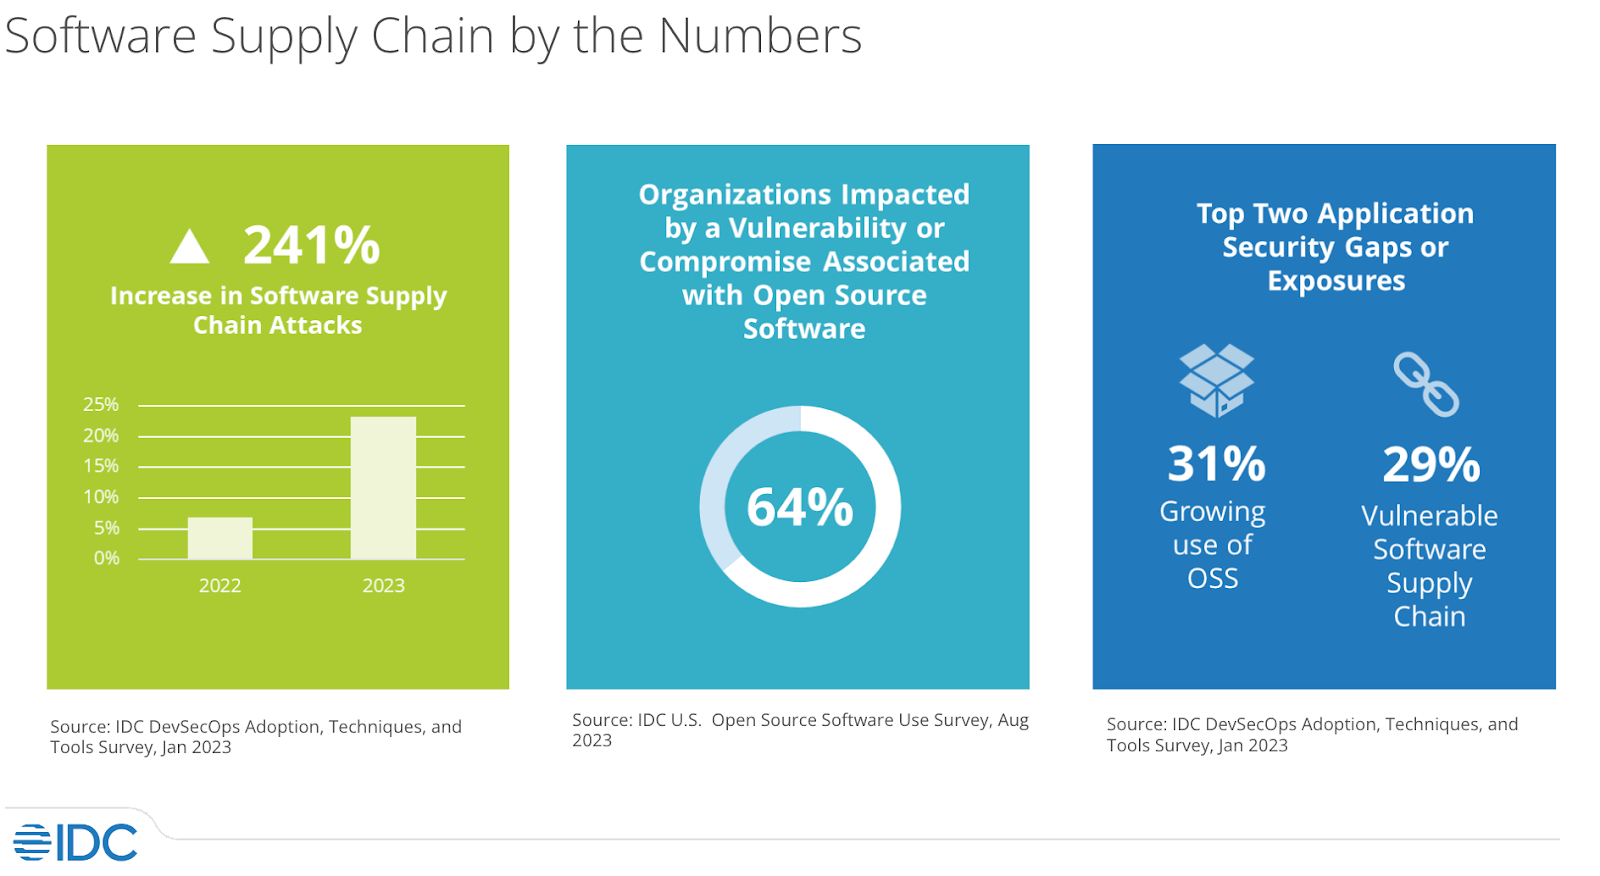 ODC research: Software supply chain by the numbers